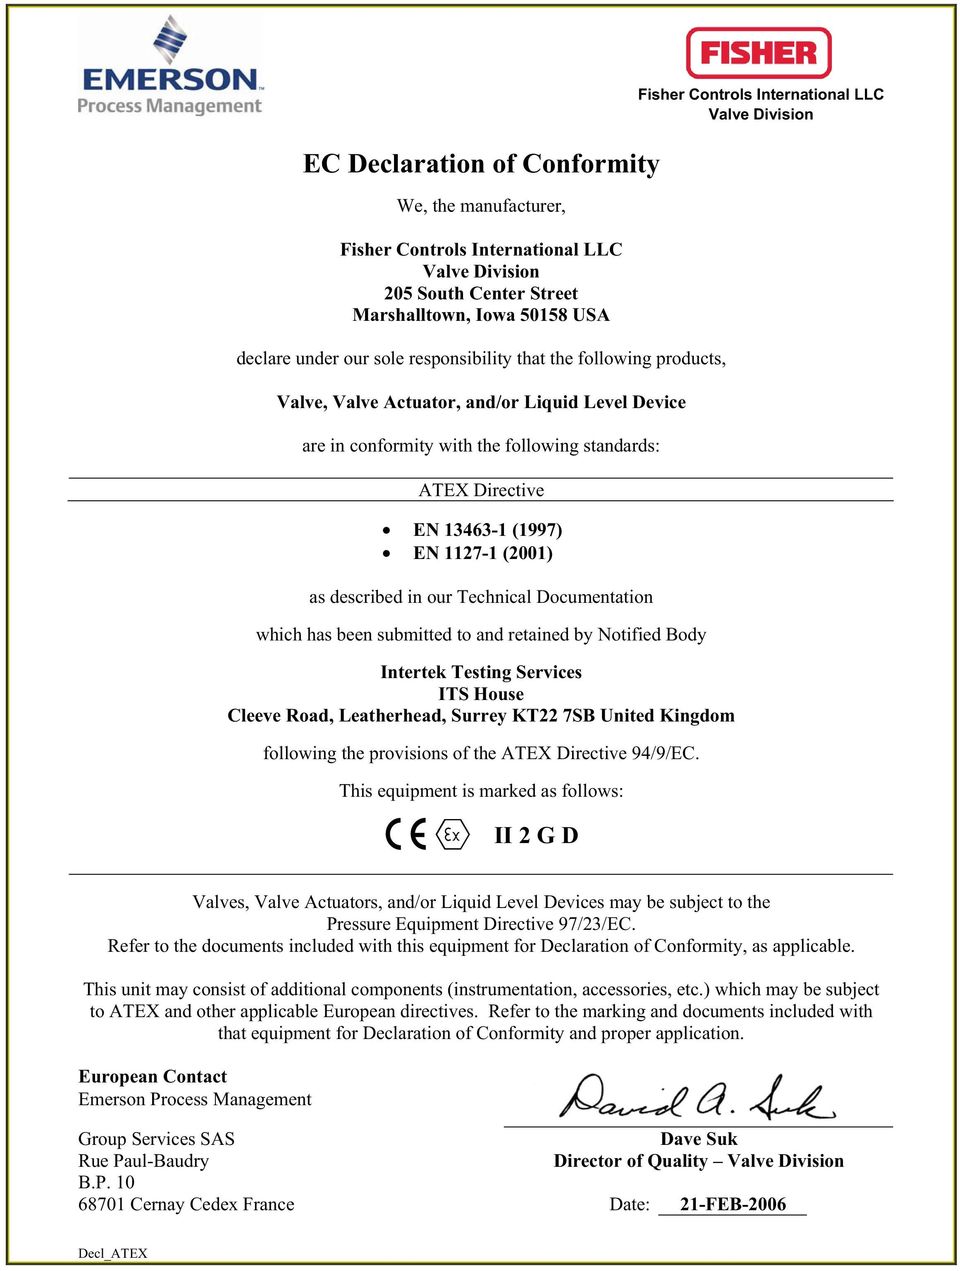 United Kingdom following the provisions of the ATEX Directive 94/9/EC.